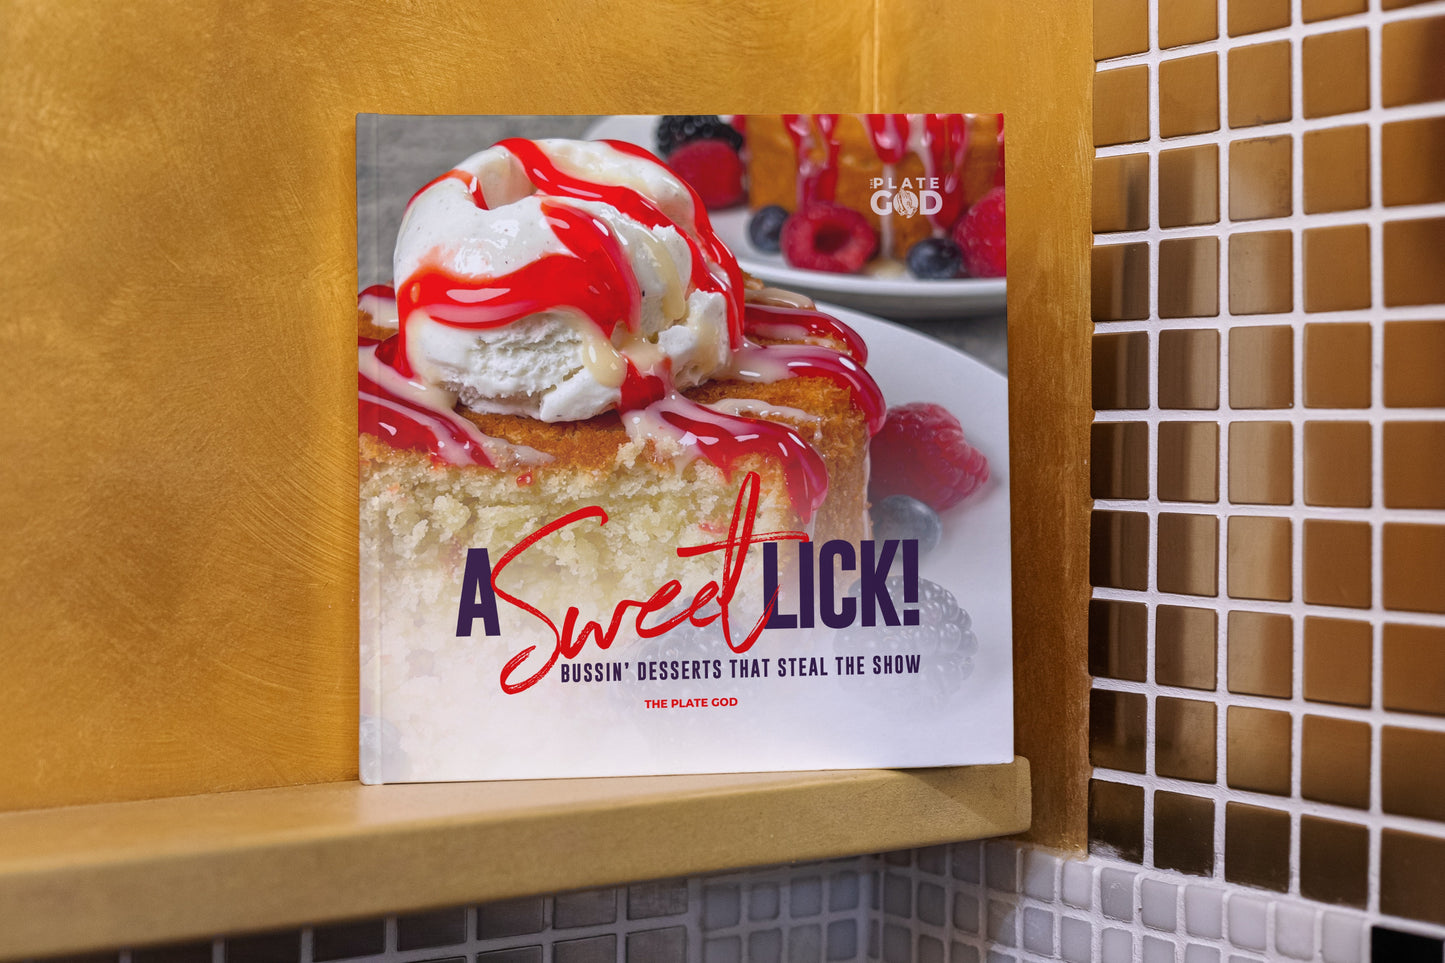 A Sweet Lick: Bussin' Desserts That Steal the Show (Hardcover)